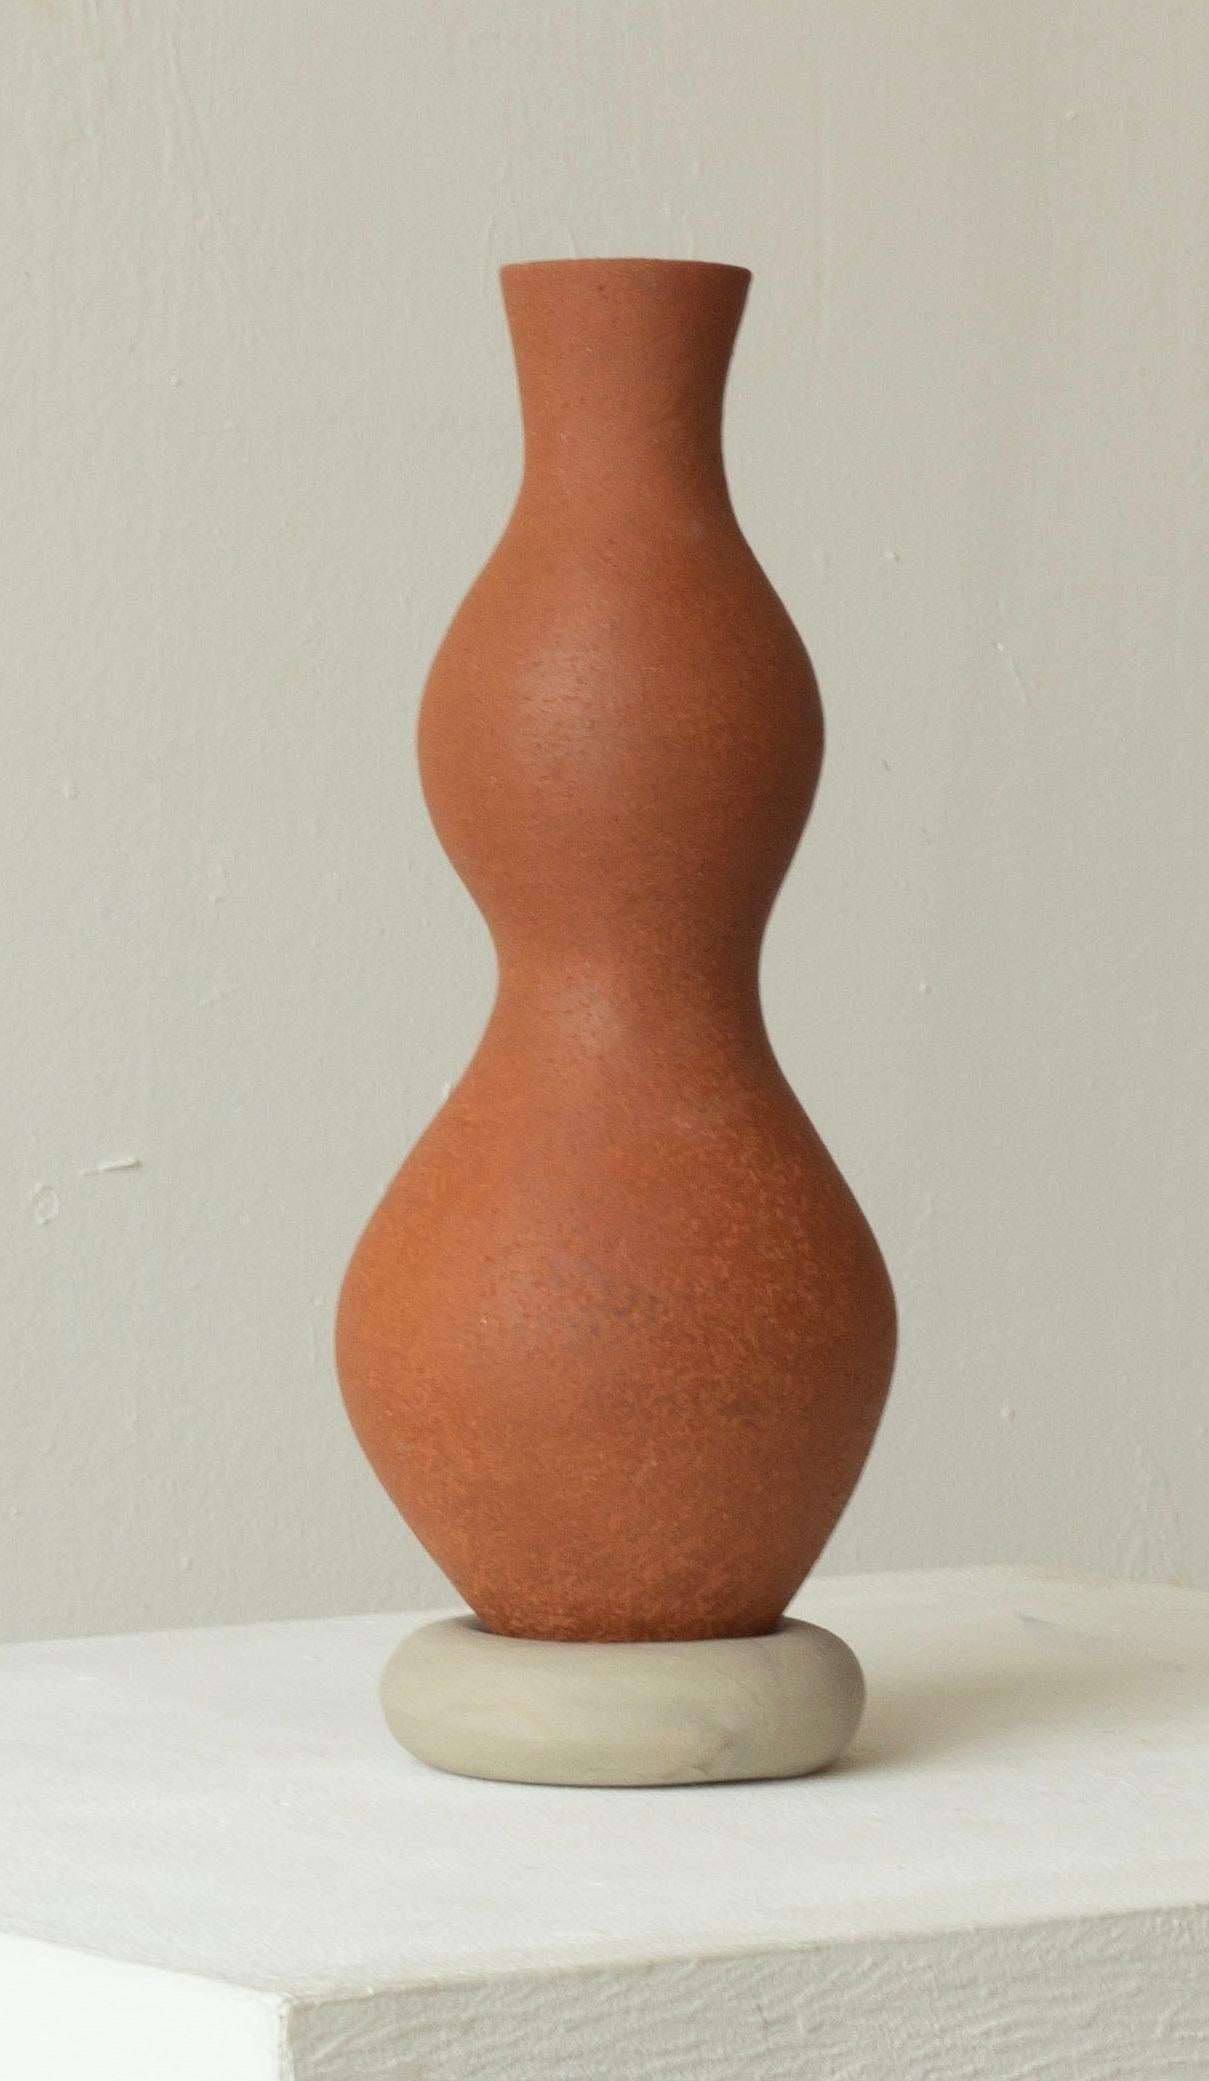 Woman Cracked But Healed 227 Vase by Karina Smagulova
One of a Kind.
Dimensions: Ø 10 x H 28 cm.
Materials: Terracotta, Grey stoneware and epoxy.
​
With an Armenian and Kazakhstan heritage, Karina Smagulova was born in Greece in 1995 and graduated